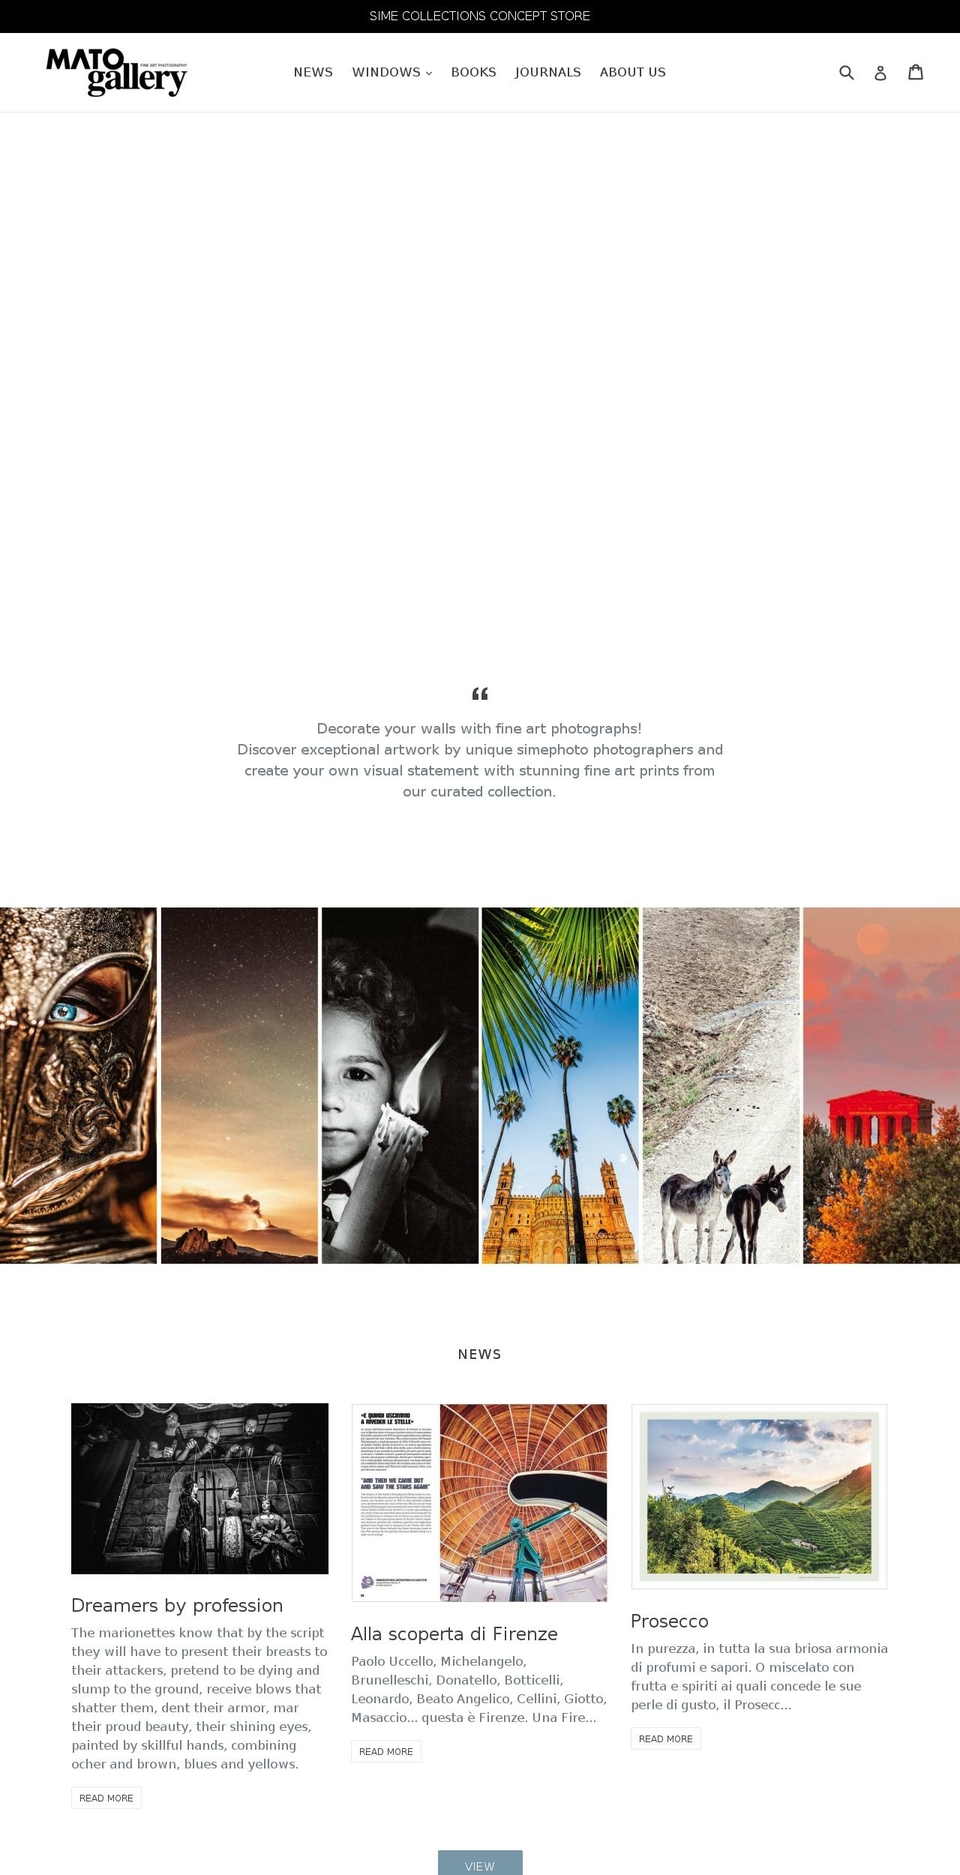 Copy of Debut Shopify theme site example mato-gallery.com